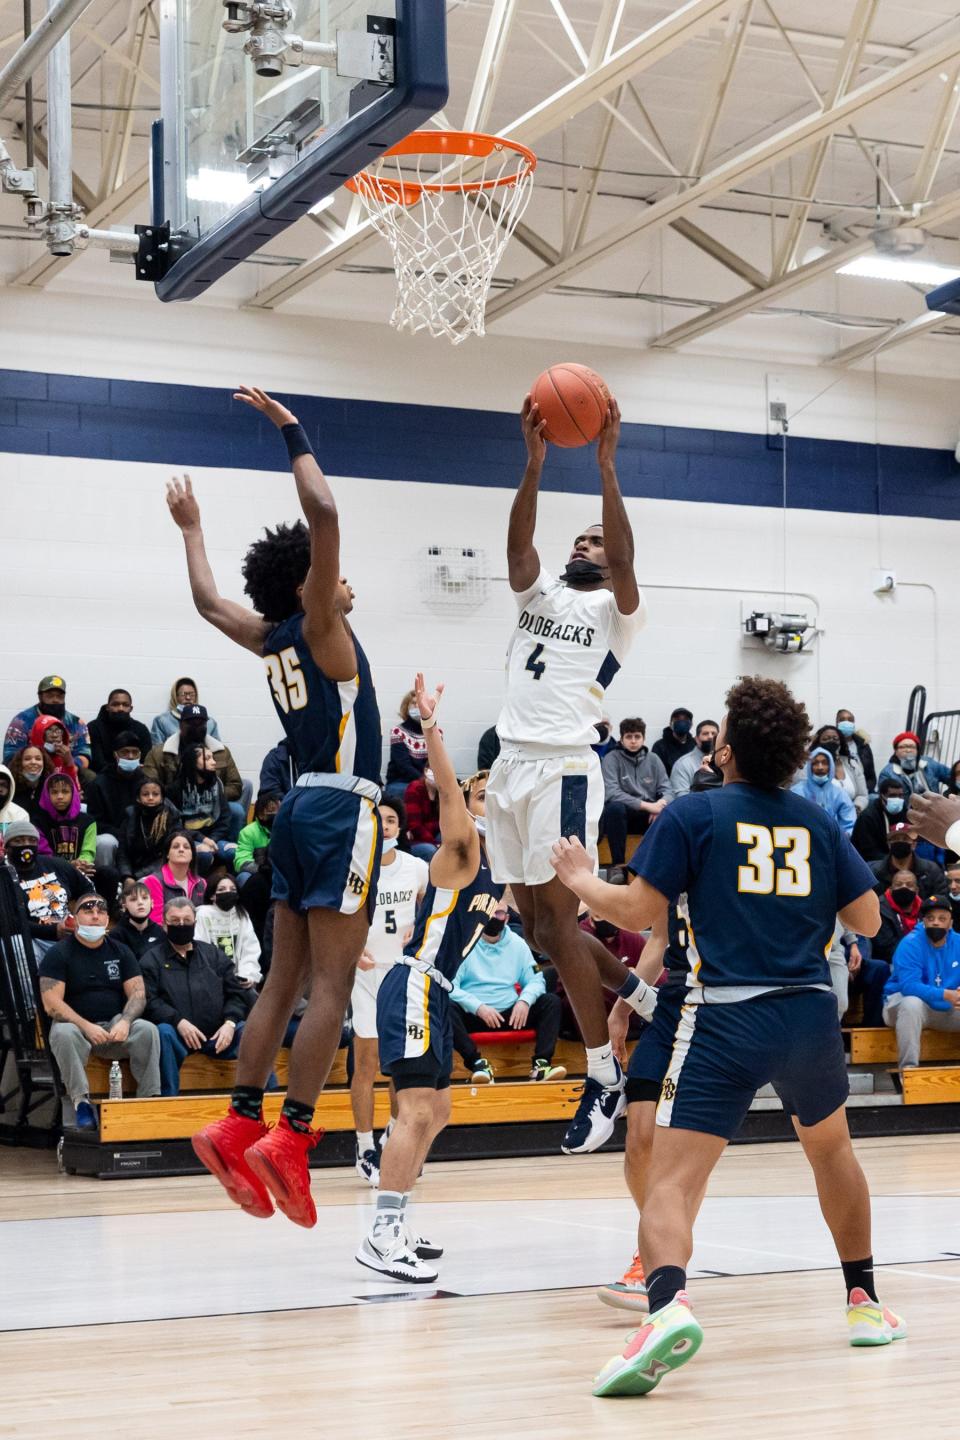 Newburgh Free Academy's Jah'Likai King (4) goes up for a shot in Sunday's Class AA semifinal playoff. King scored 22 points as Newburgh beat Pine Bush 67-52.  ALLYSE PULLIAM/For the Times Herald-Record